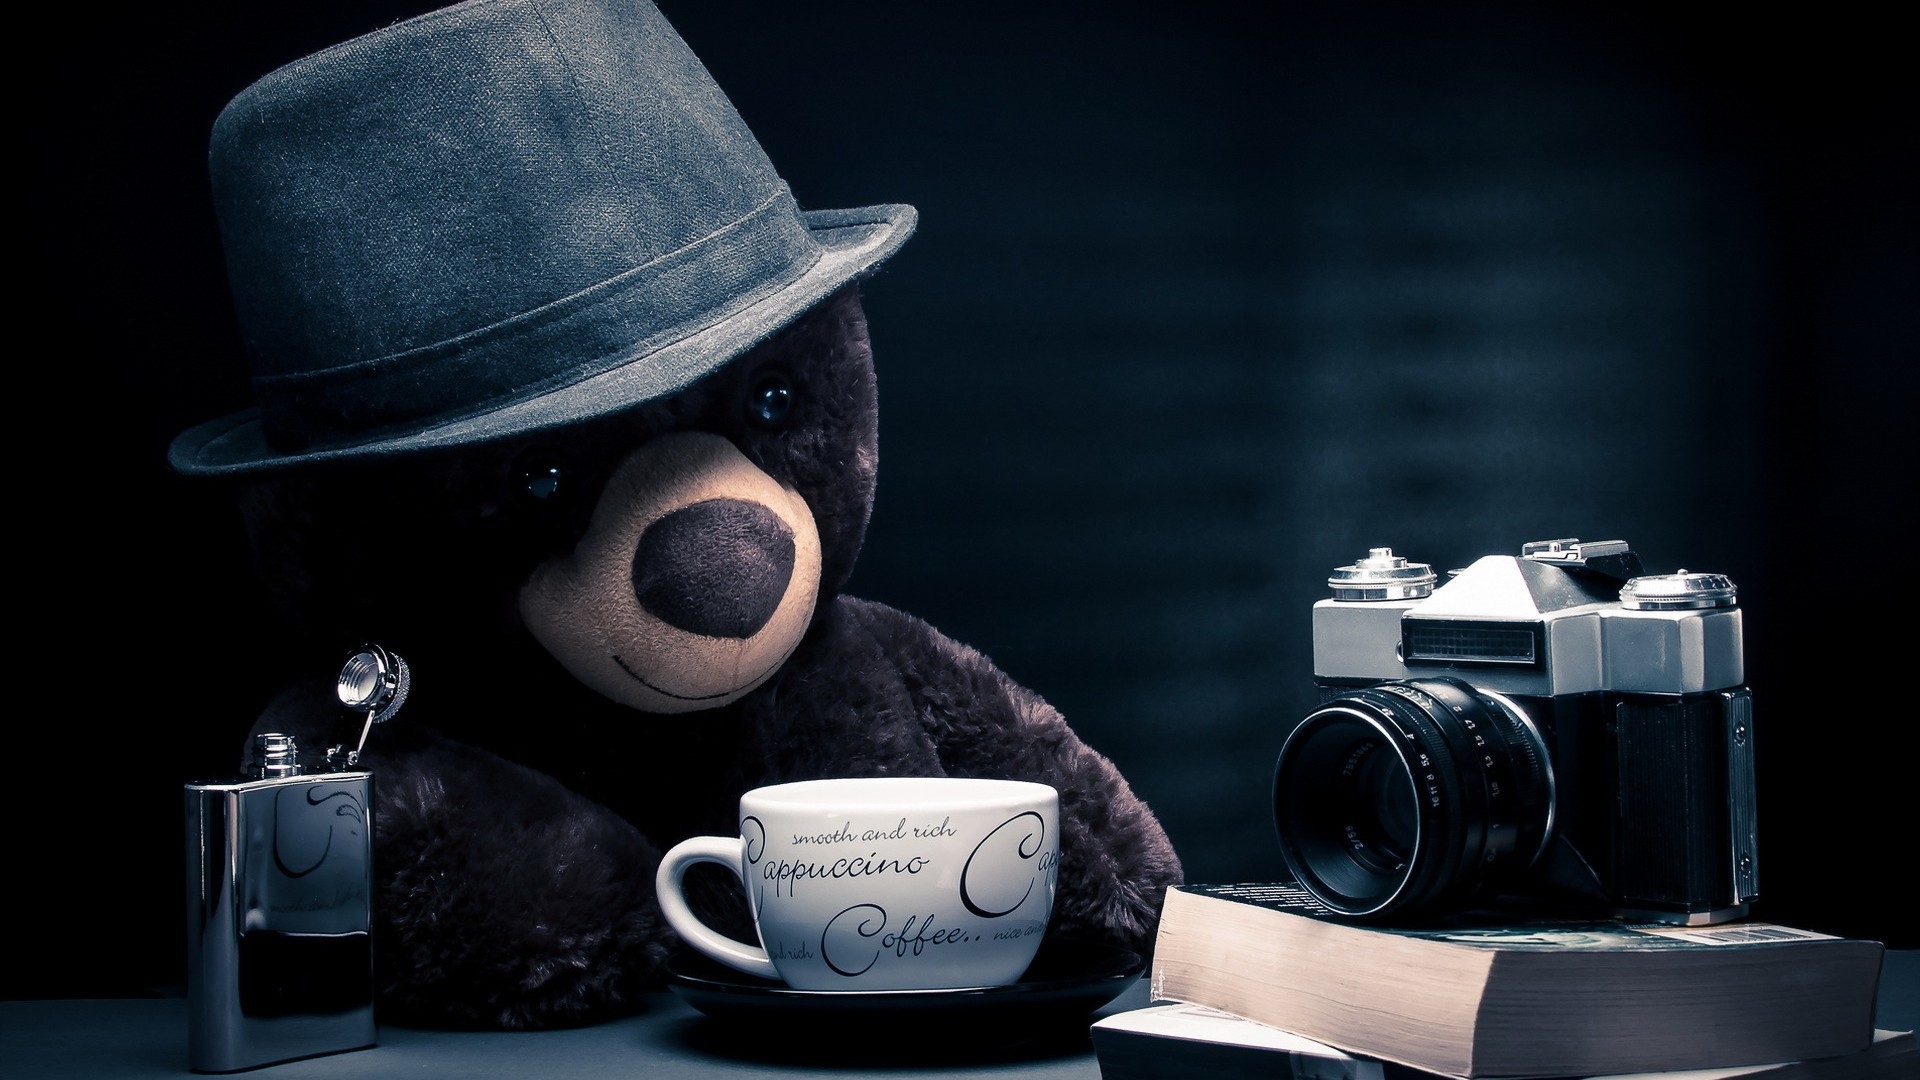 Coffee Time for Teddy Bear for 1920 x 1080 HDTV 1080p resolution